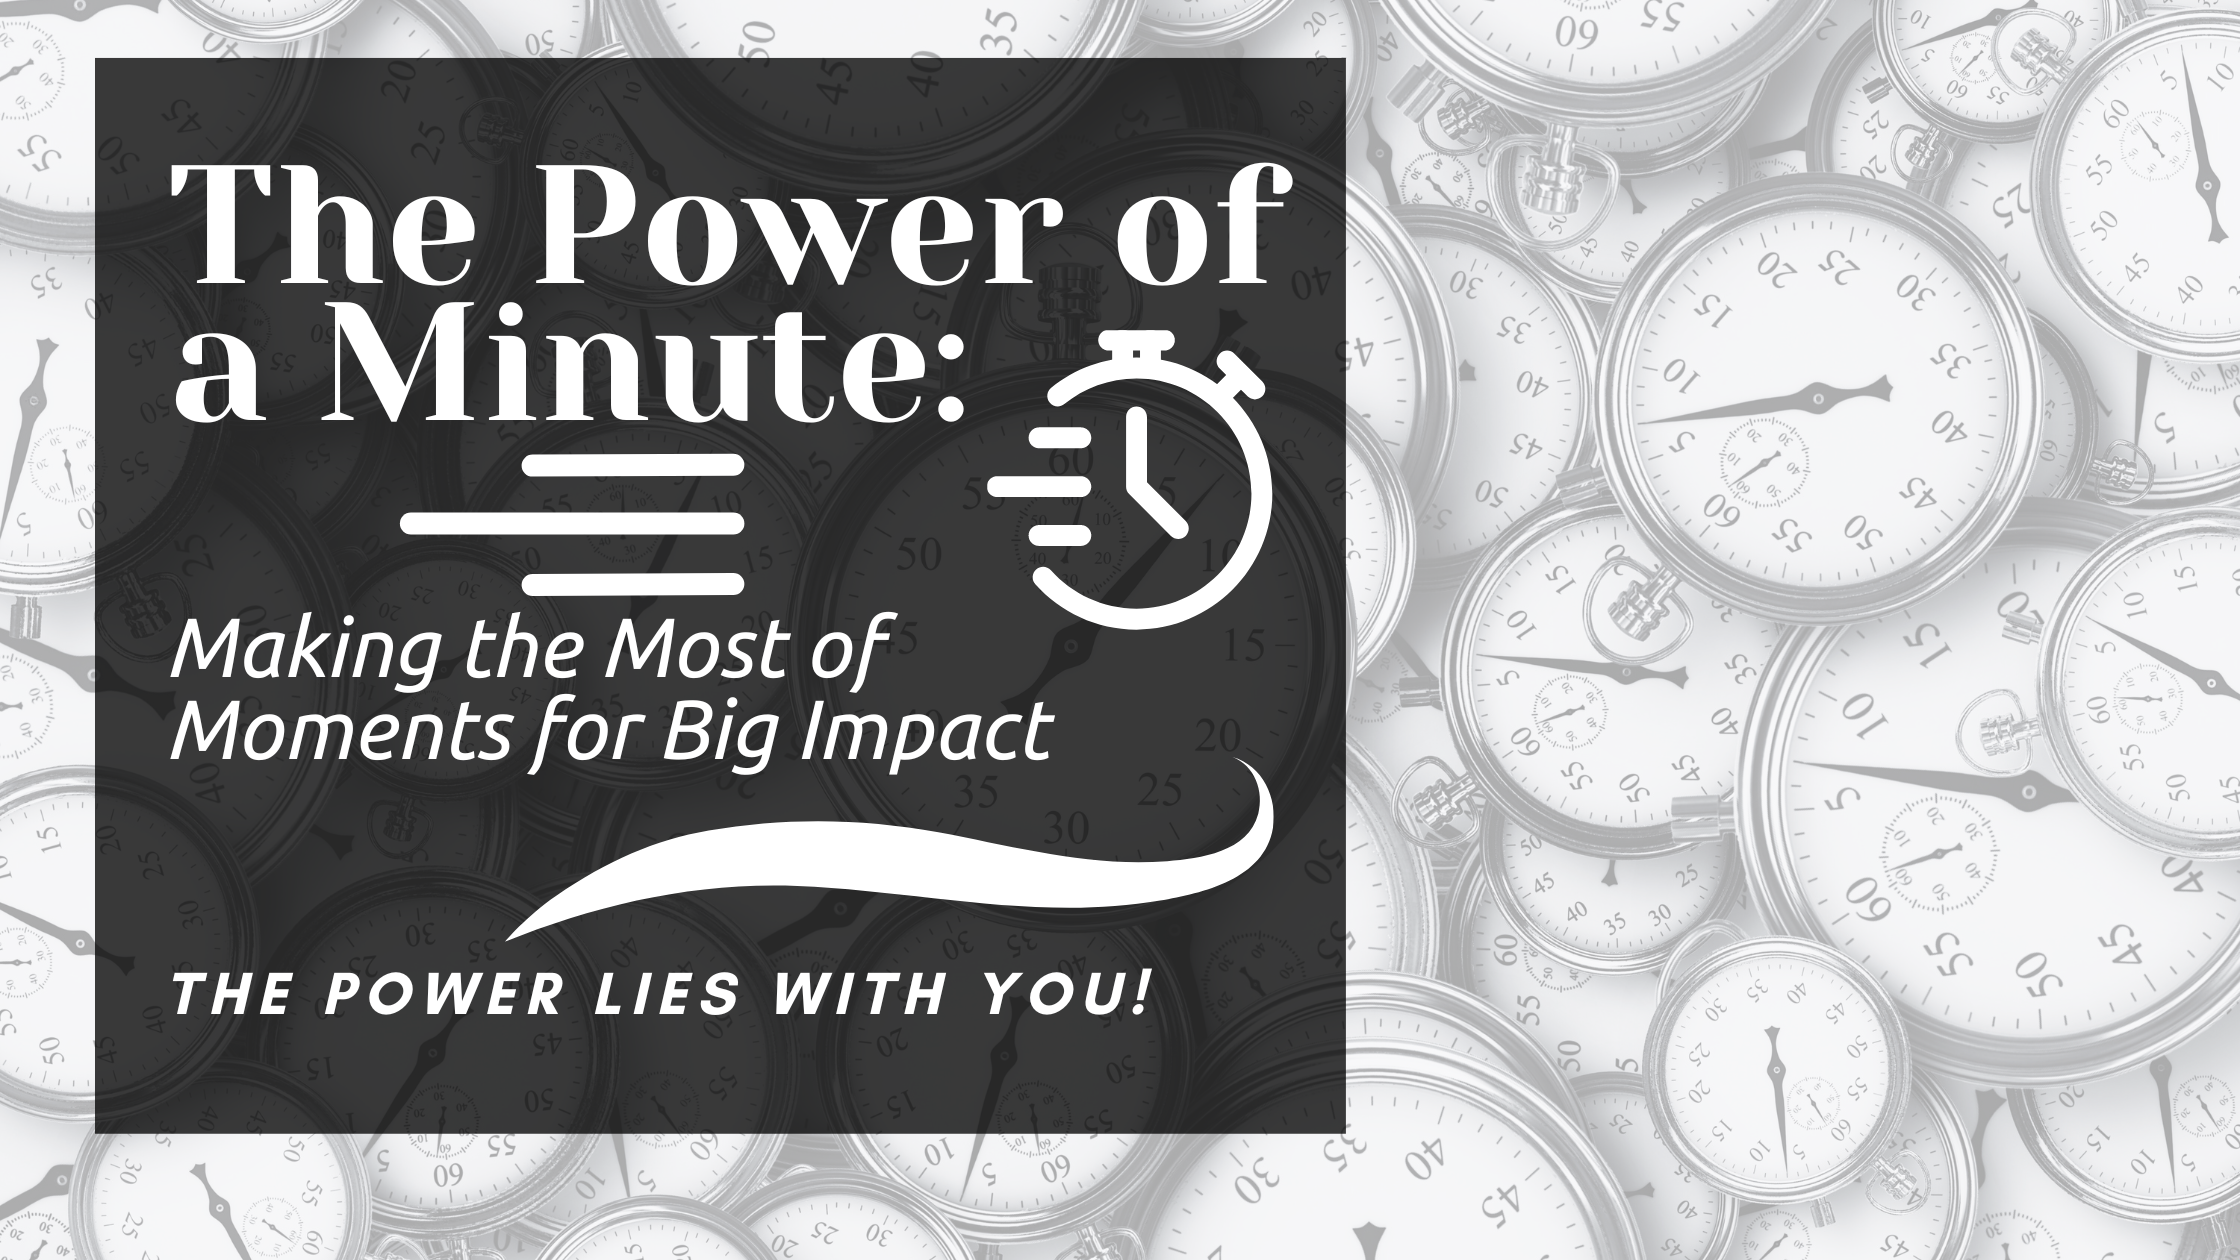 The Power of a Minute: Making the Most of Moments for Big Impact